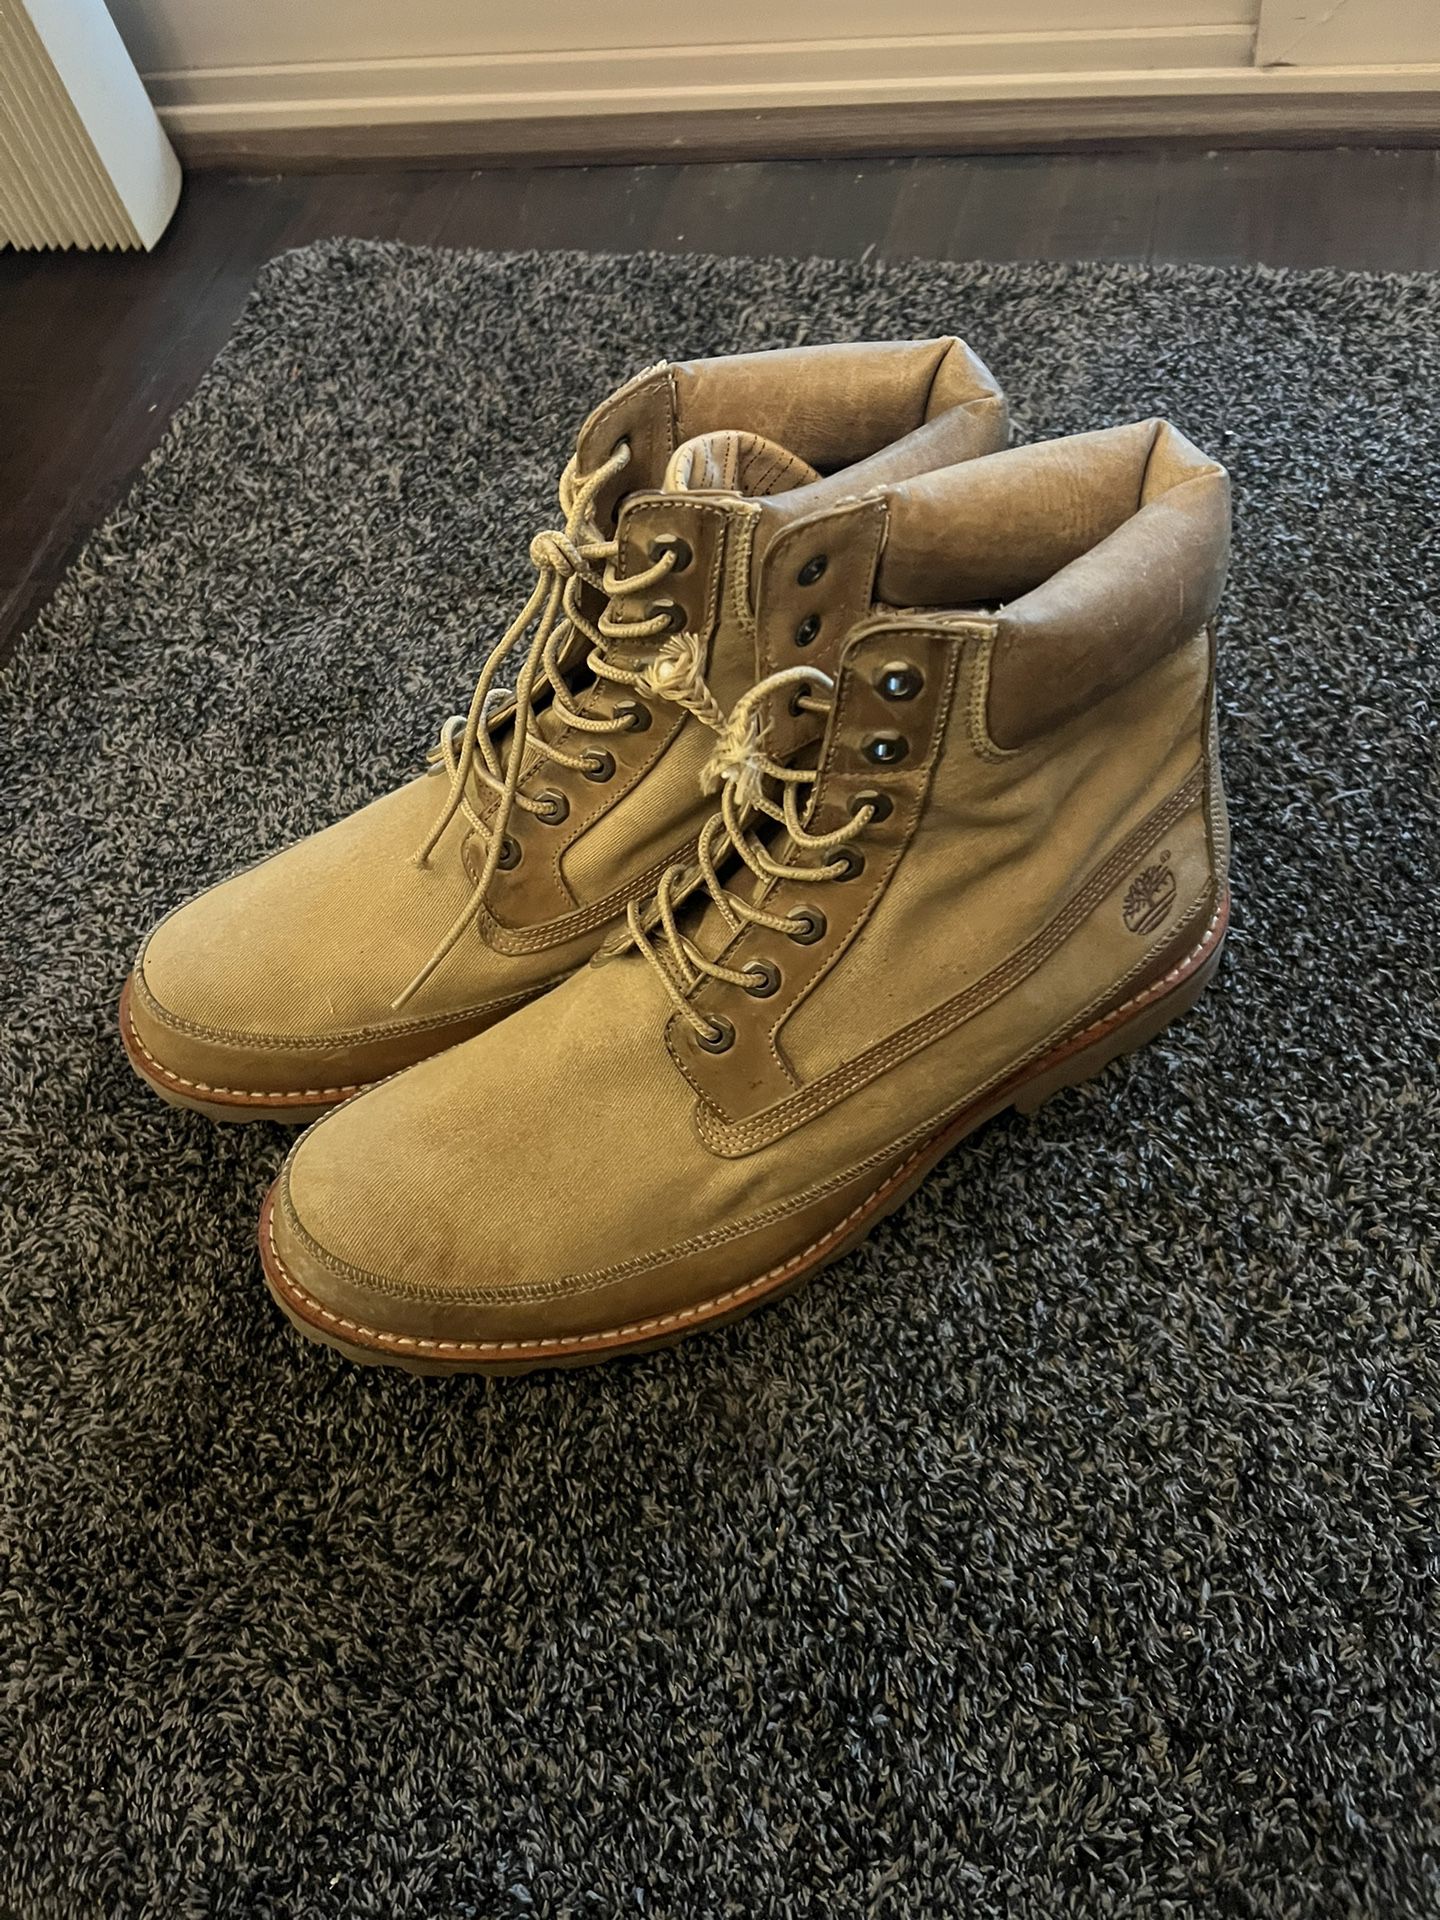 Timberland Earth Keepers Mens 14 Working Boots